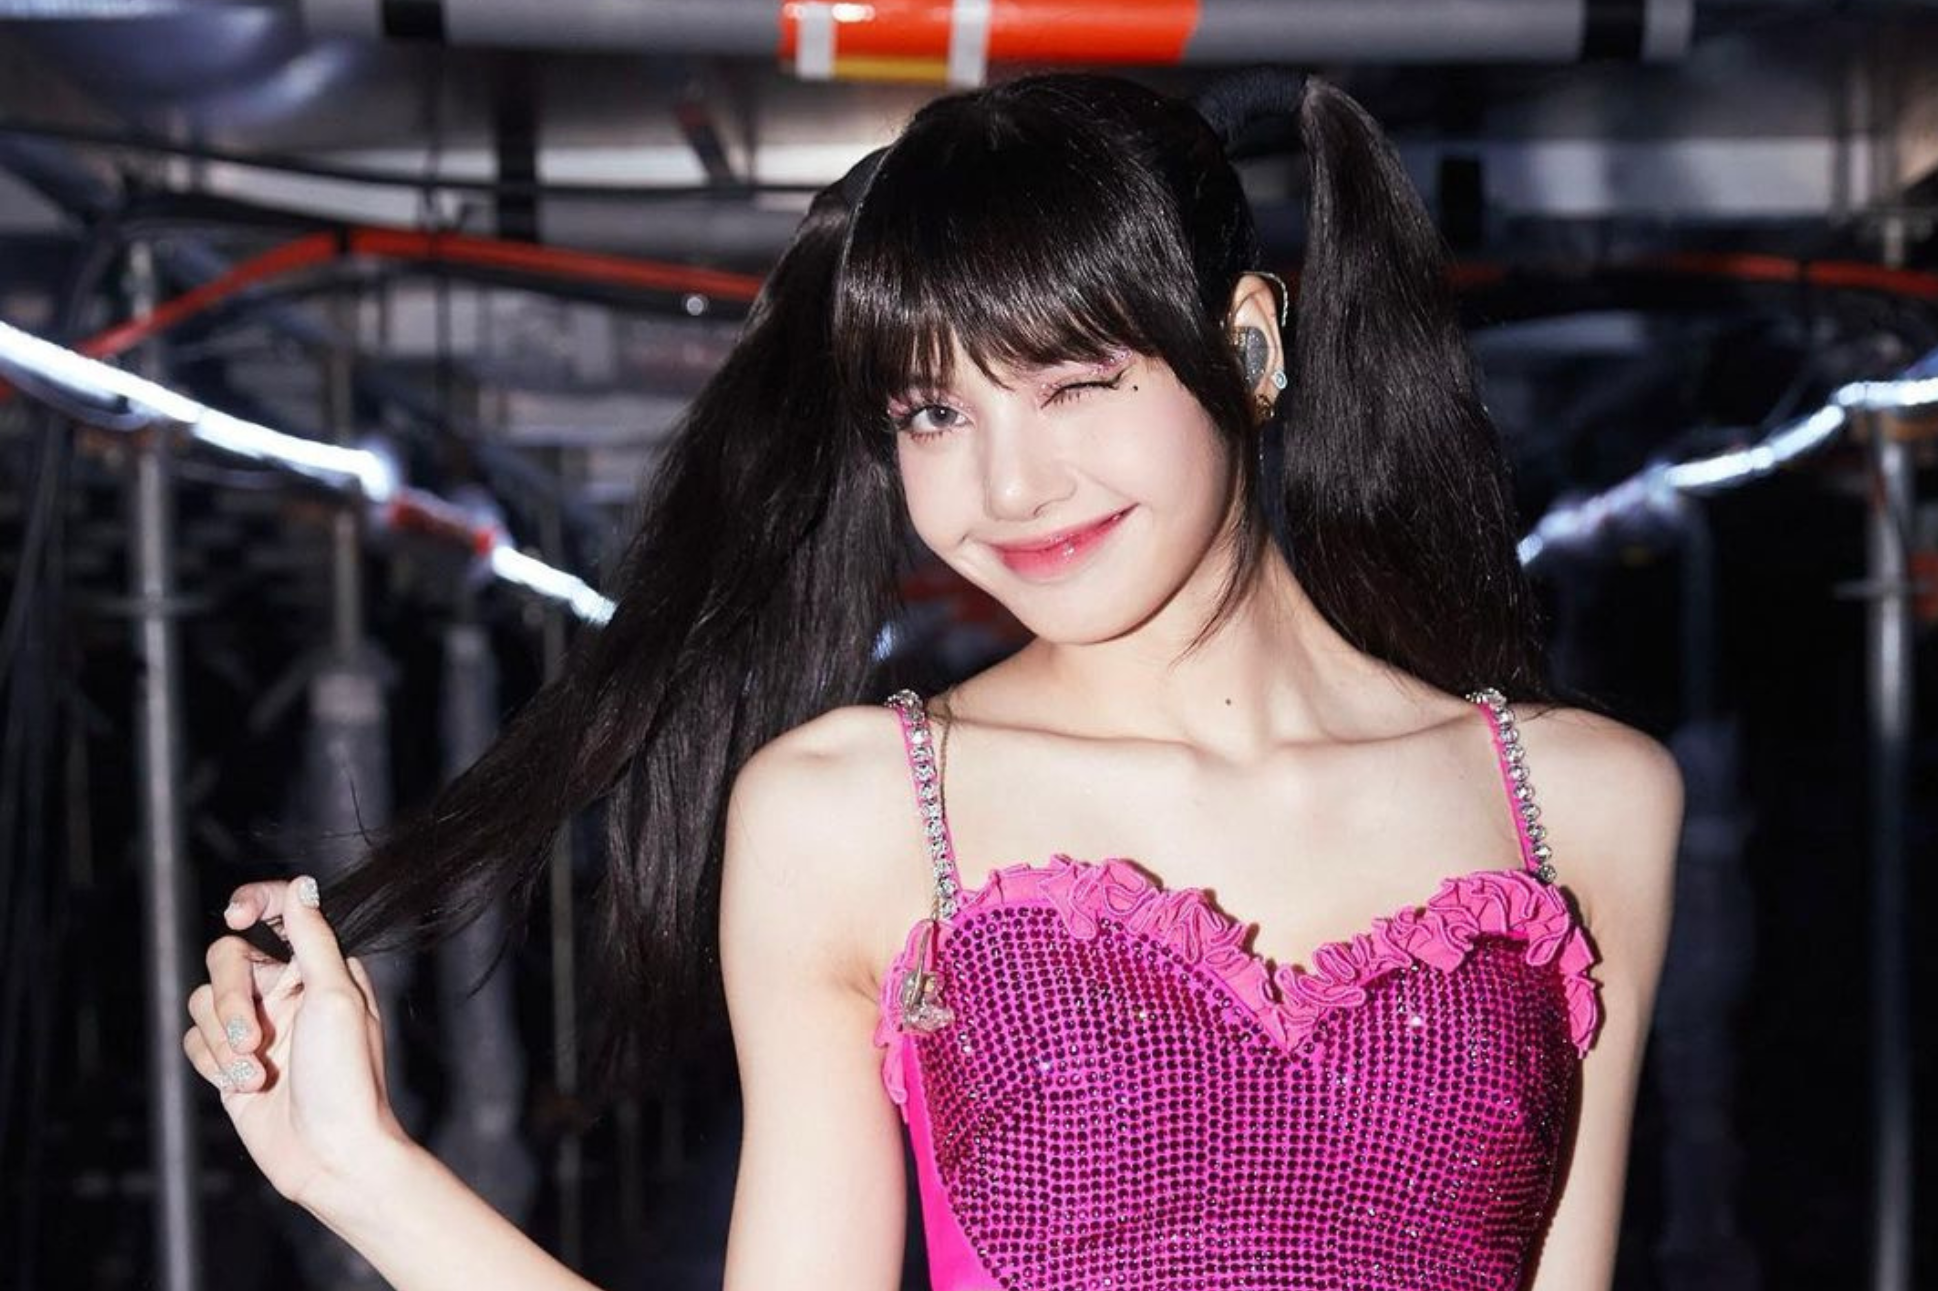 YG Entertainment confirms Blackpink's contract renewals are 'ongoing,'  denies Lisa is leaving the agency